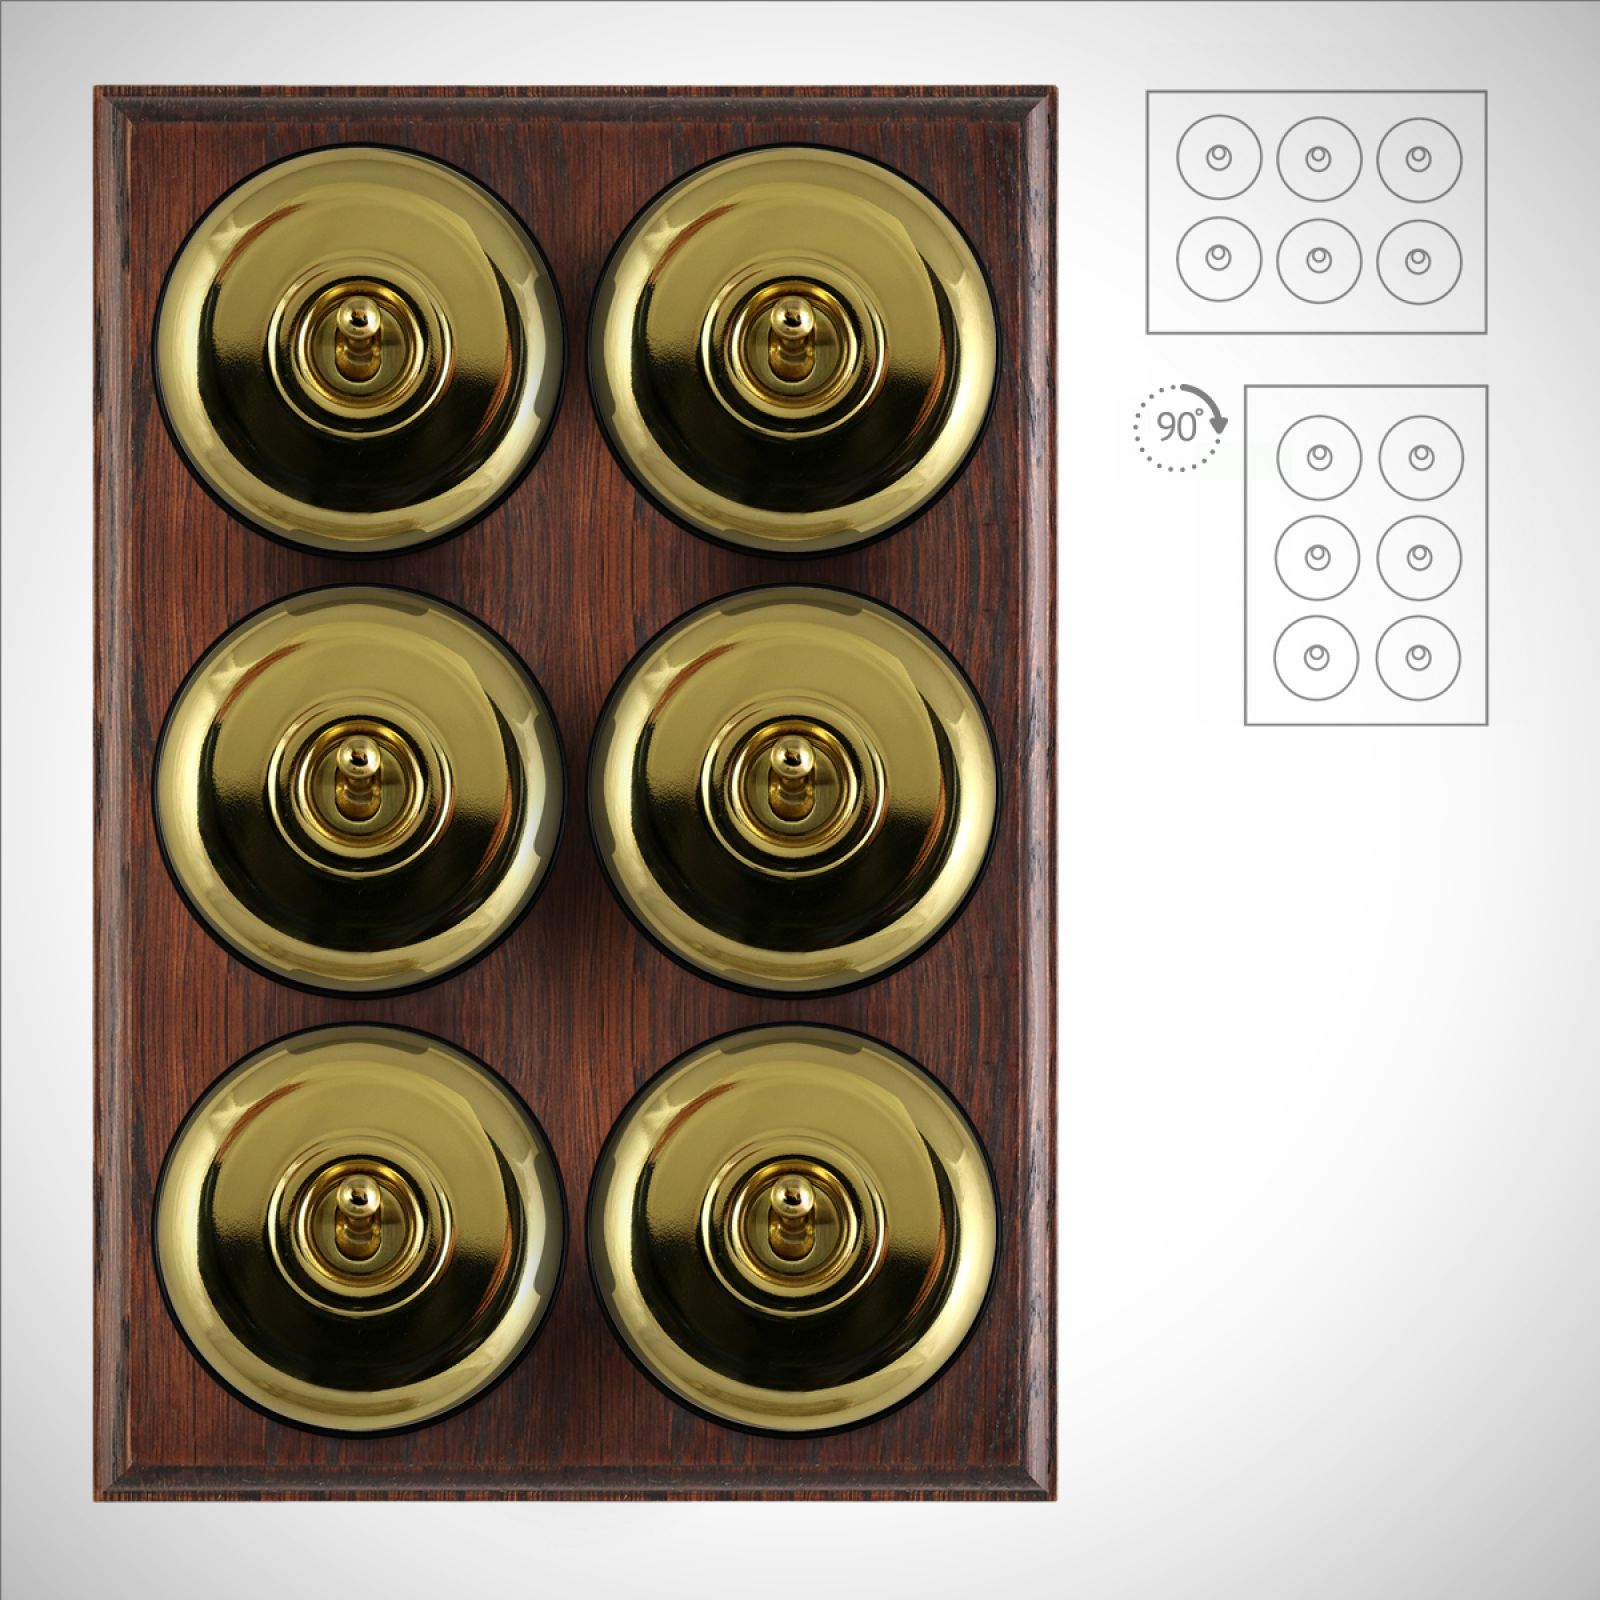 6 Gang Period Light Switch - plain in a choice of finishes